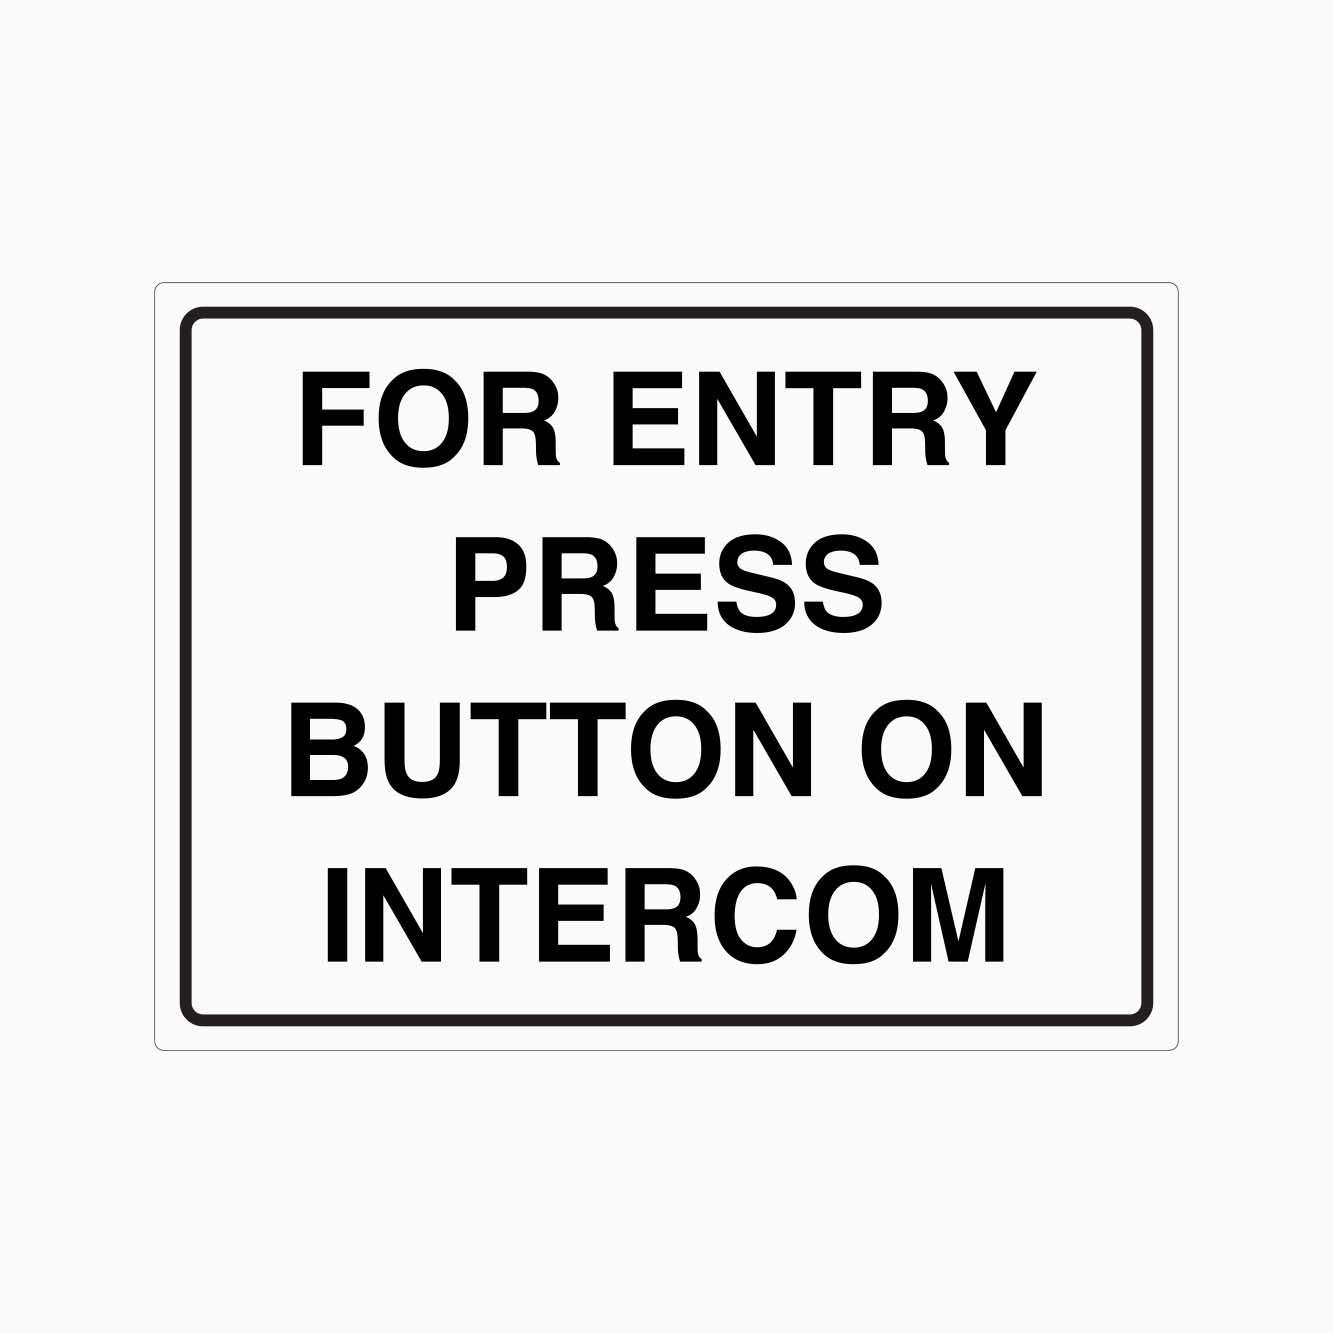 FOR ENTRY PRESS BUTTON ON INTERCOM SIGN